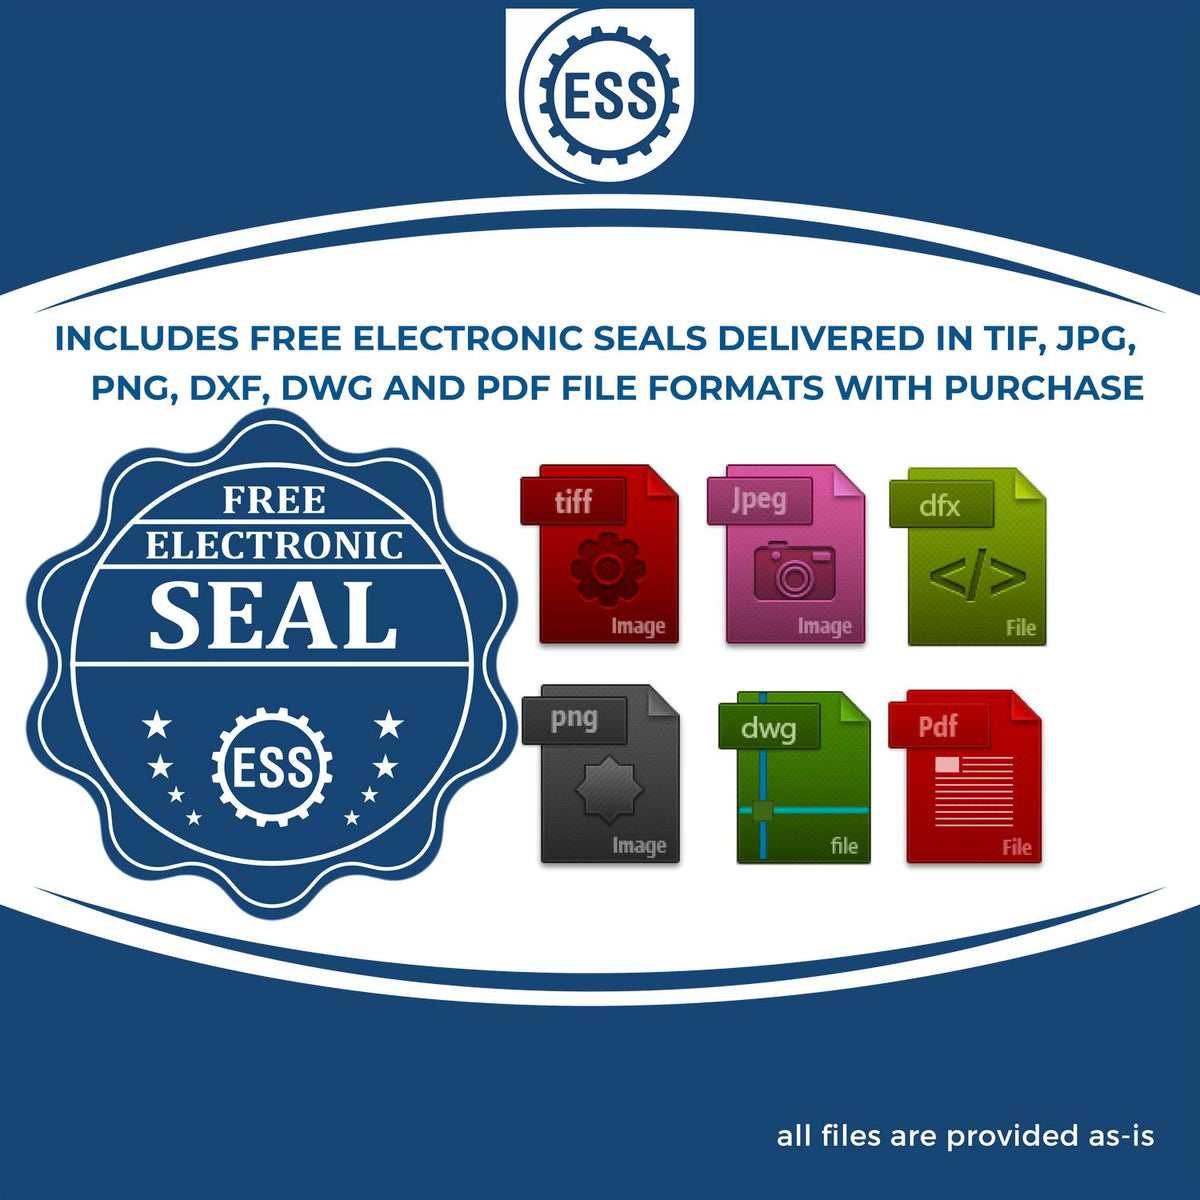 An infographic for the free electronic seal for the Heavy Duty Cast Iron Texas Architect Embosser illustrating the different file type icons such as DXF, DWG, TIF, JPG and PNG.